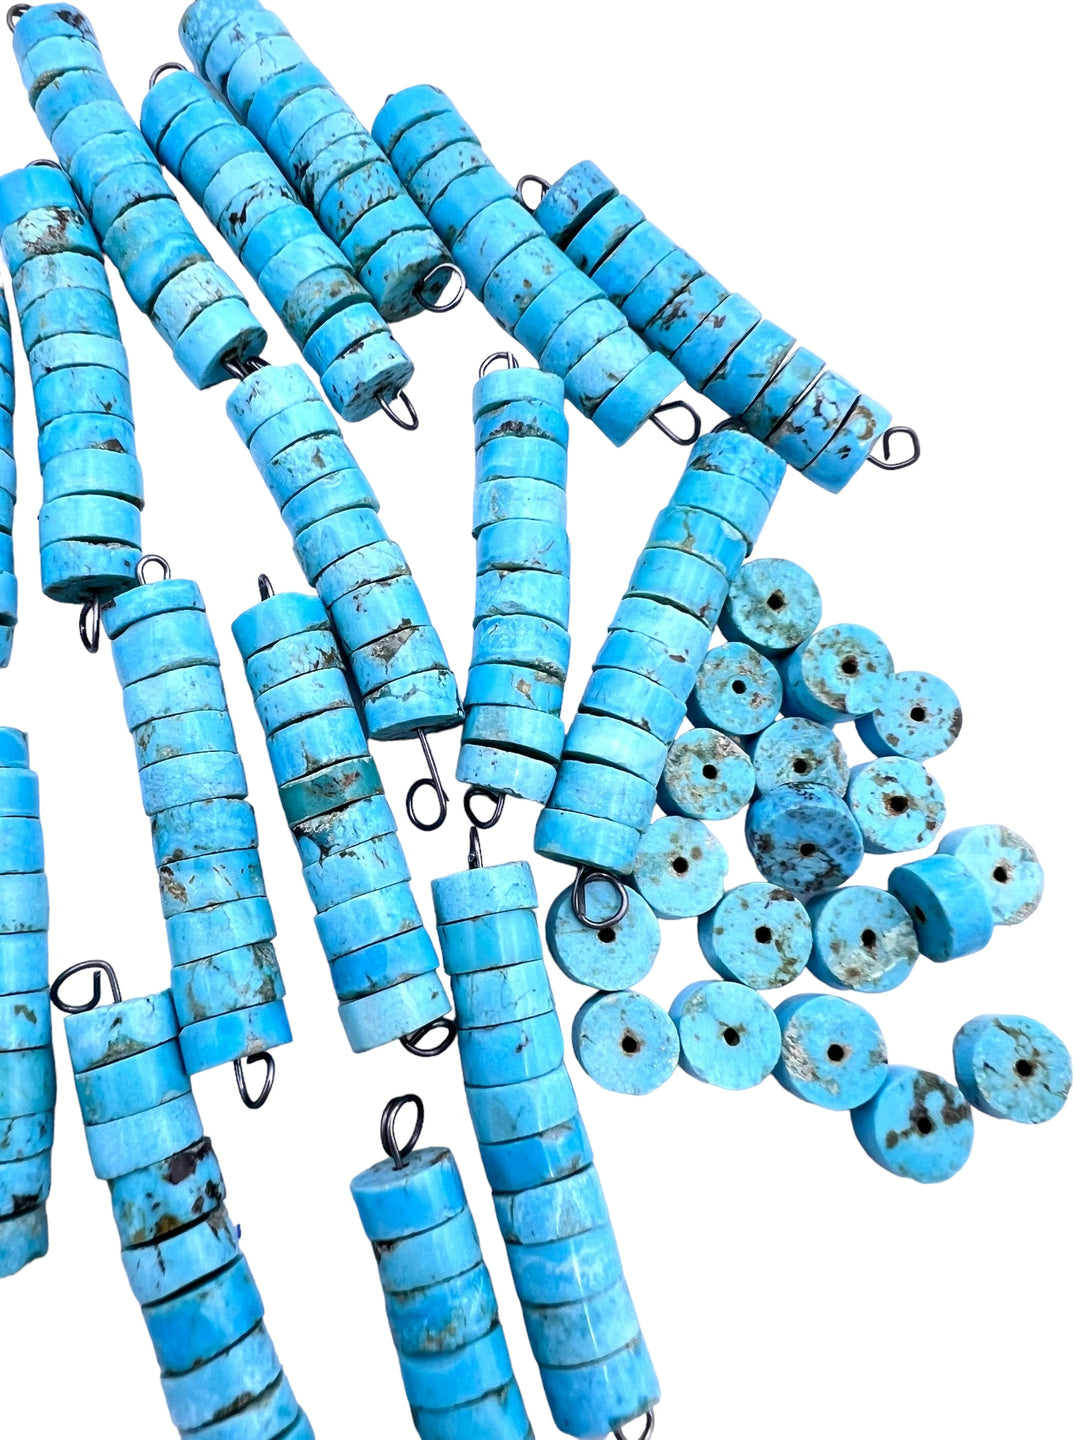 RARE Number 8 Turquoise Heishi Beads 7mm (package of 12 –